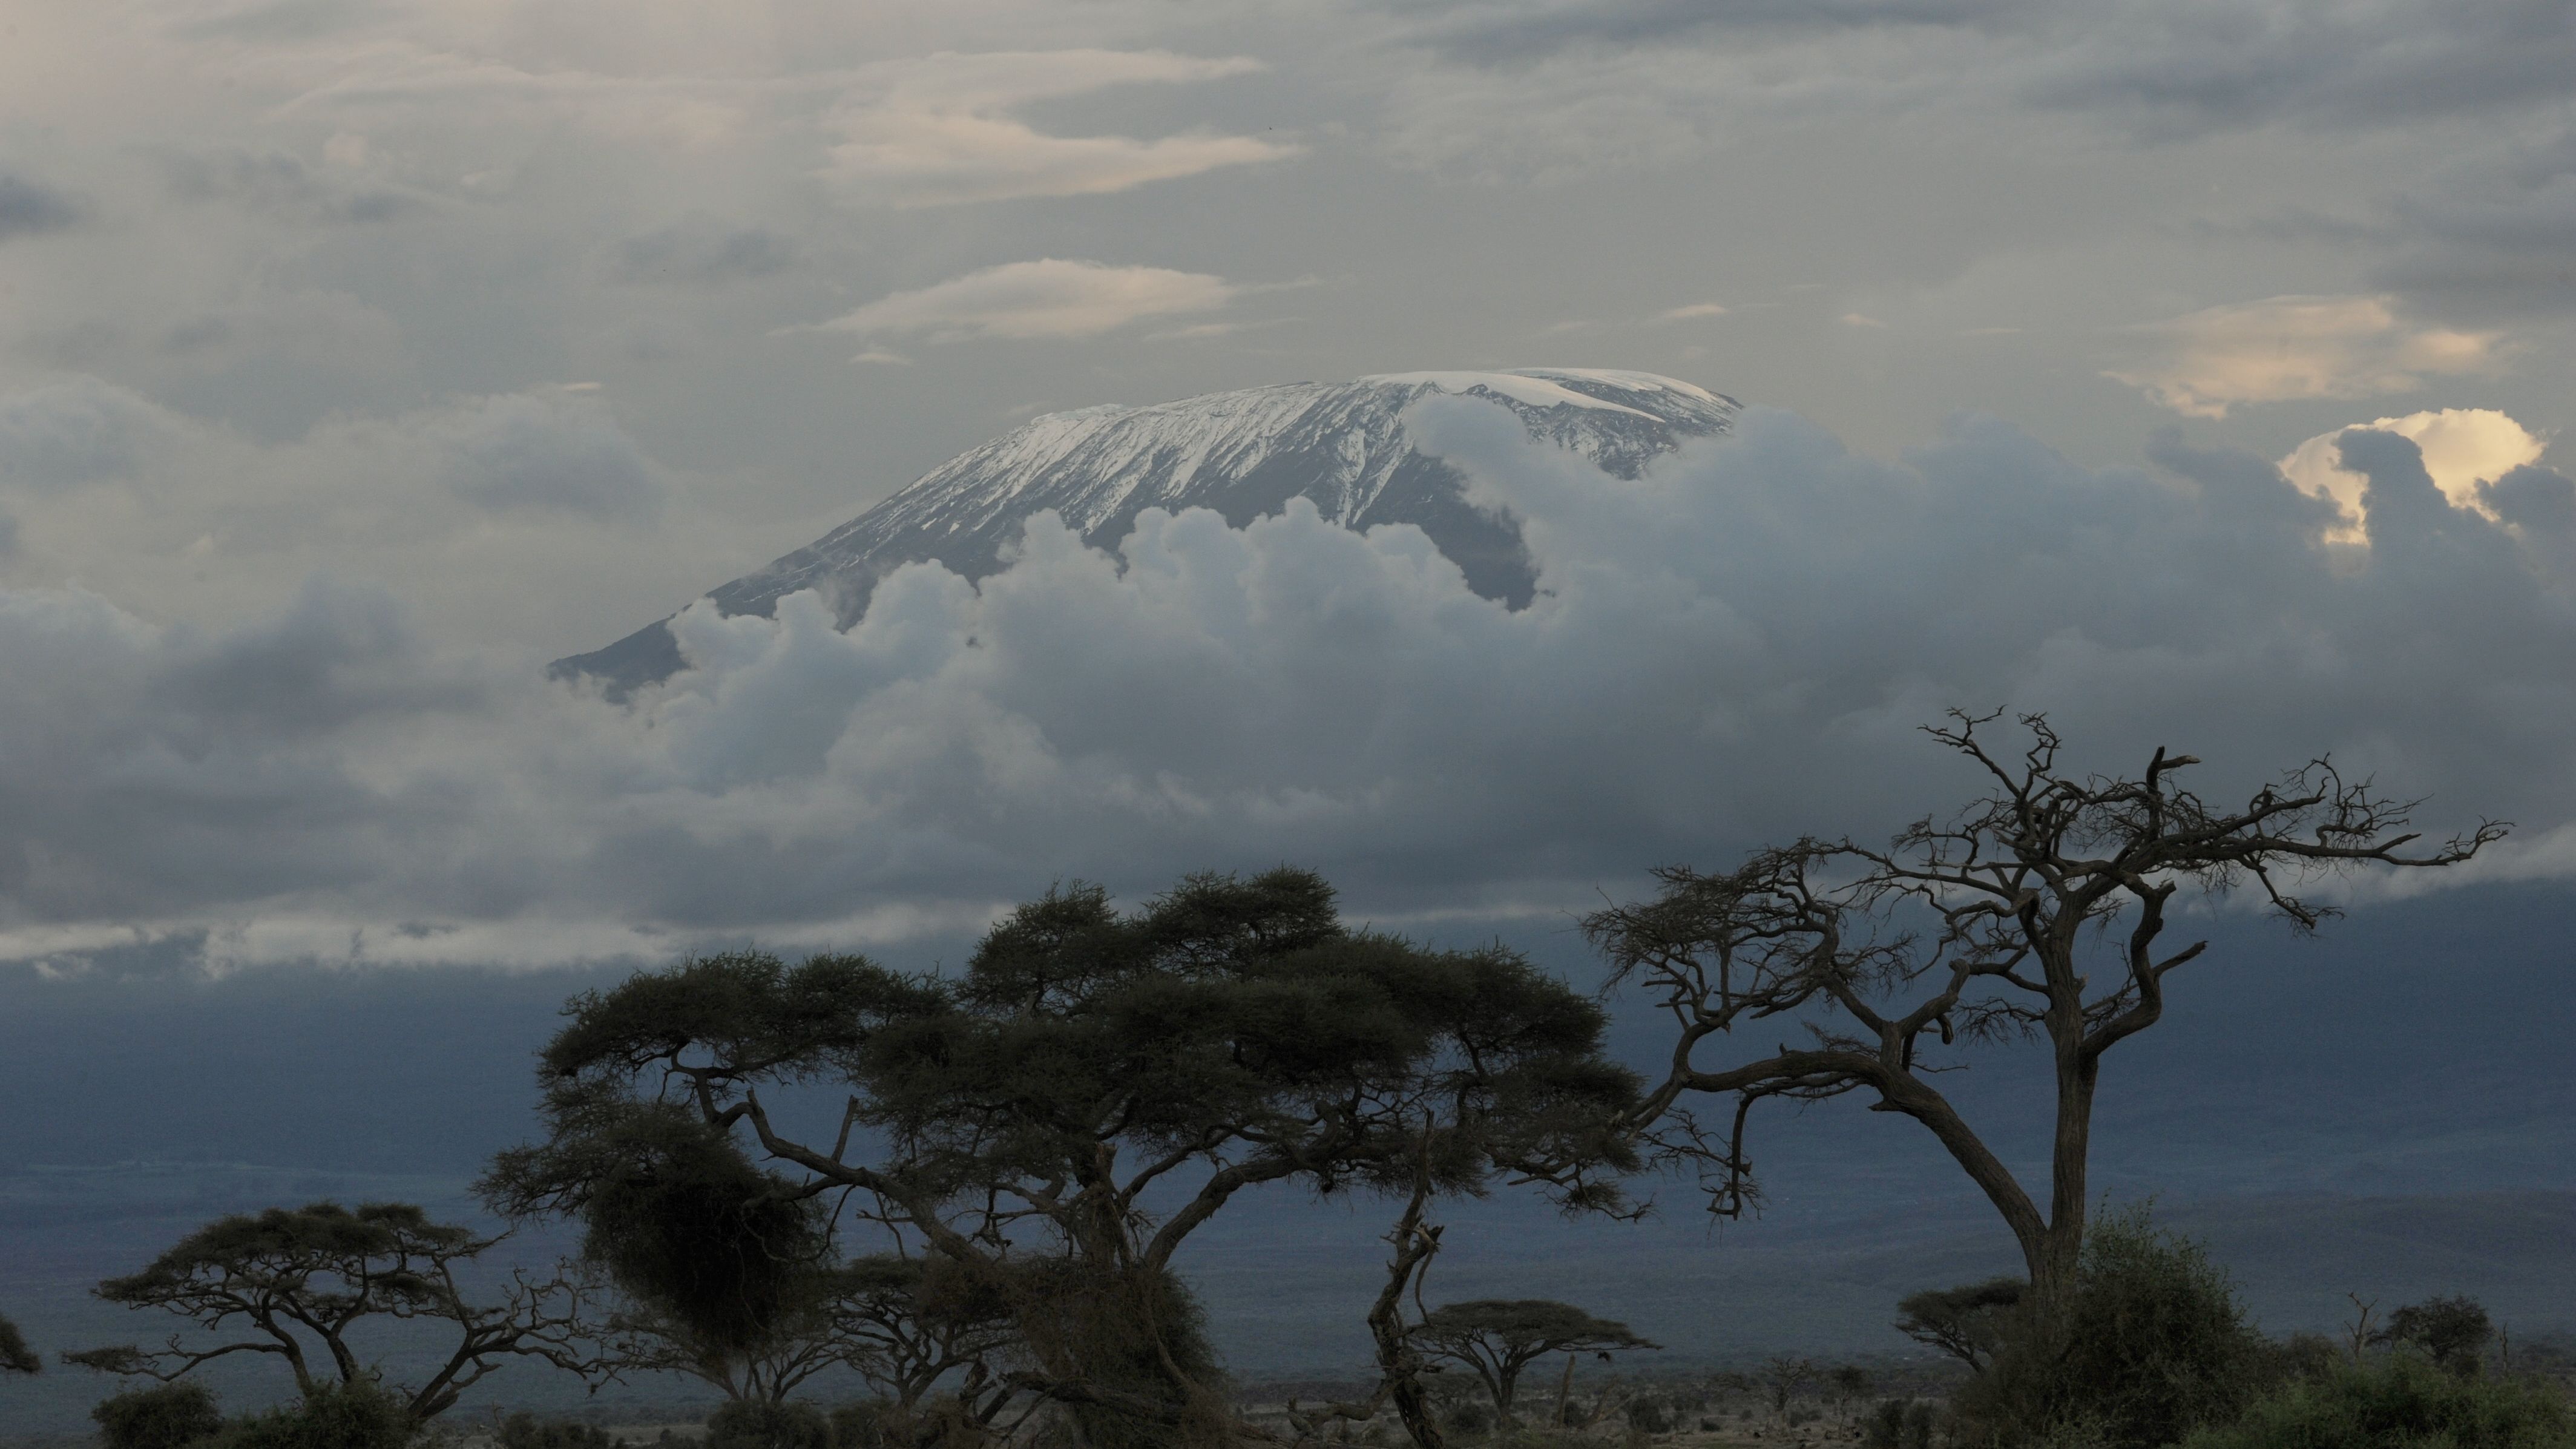 The famed snows of Mt. Kilimanjaro, actually glaciers, are retreating rapidly. Many scientists blame global warming.